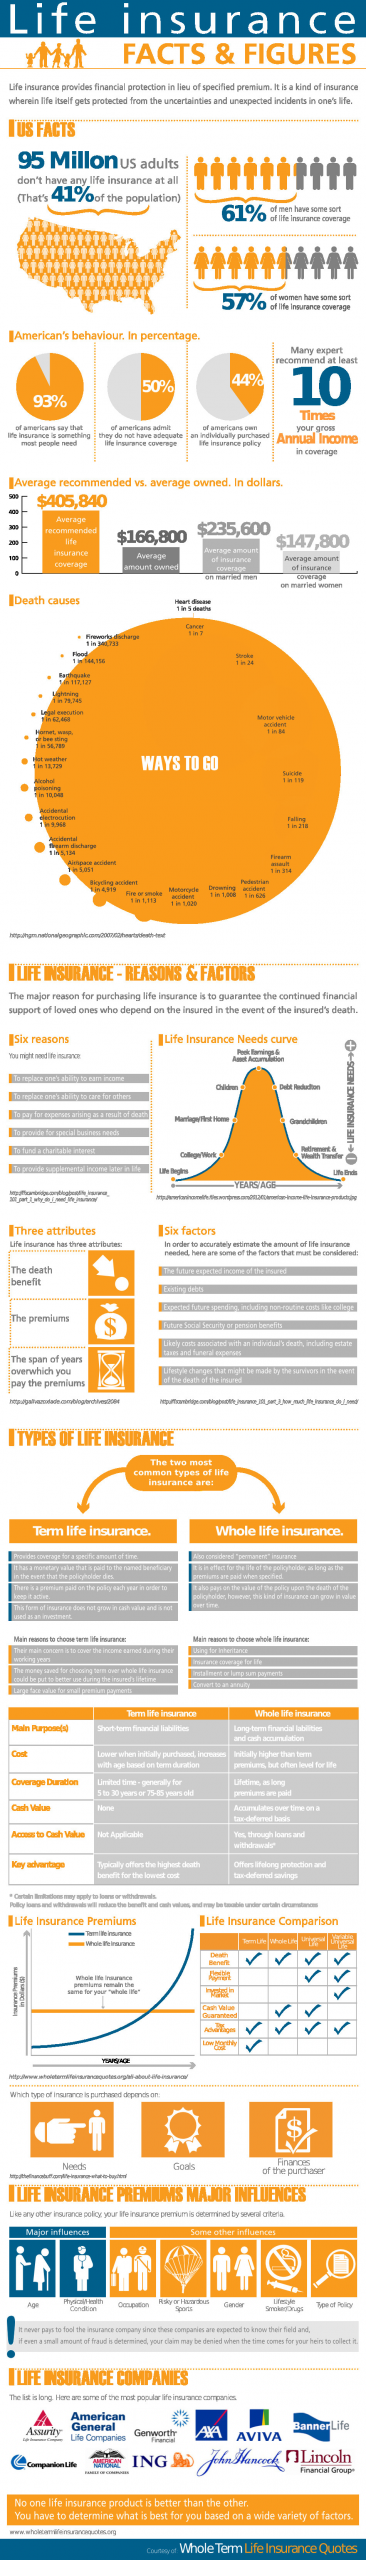 Select Quote Whole Life Insurance
 Life Insurance Facts & Figures [Infographic]